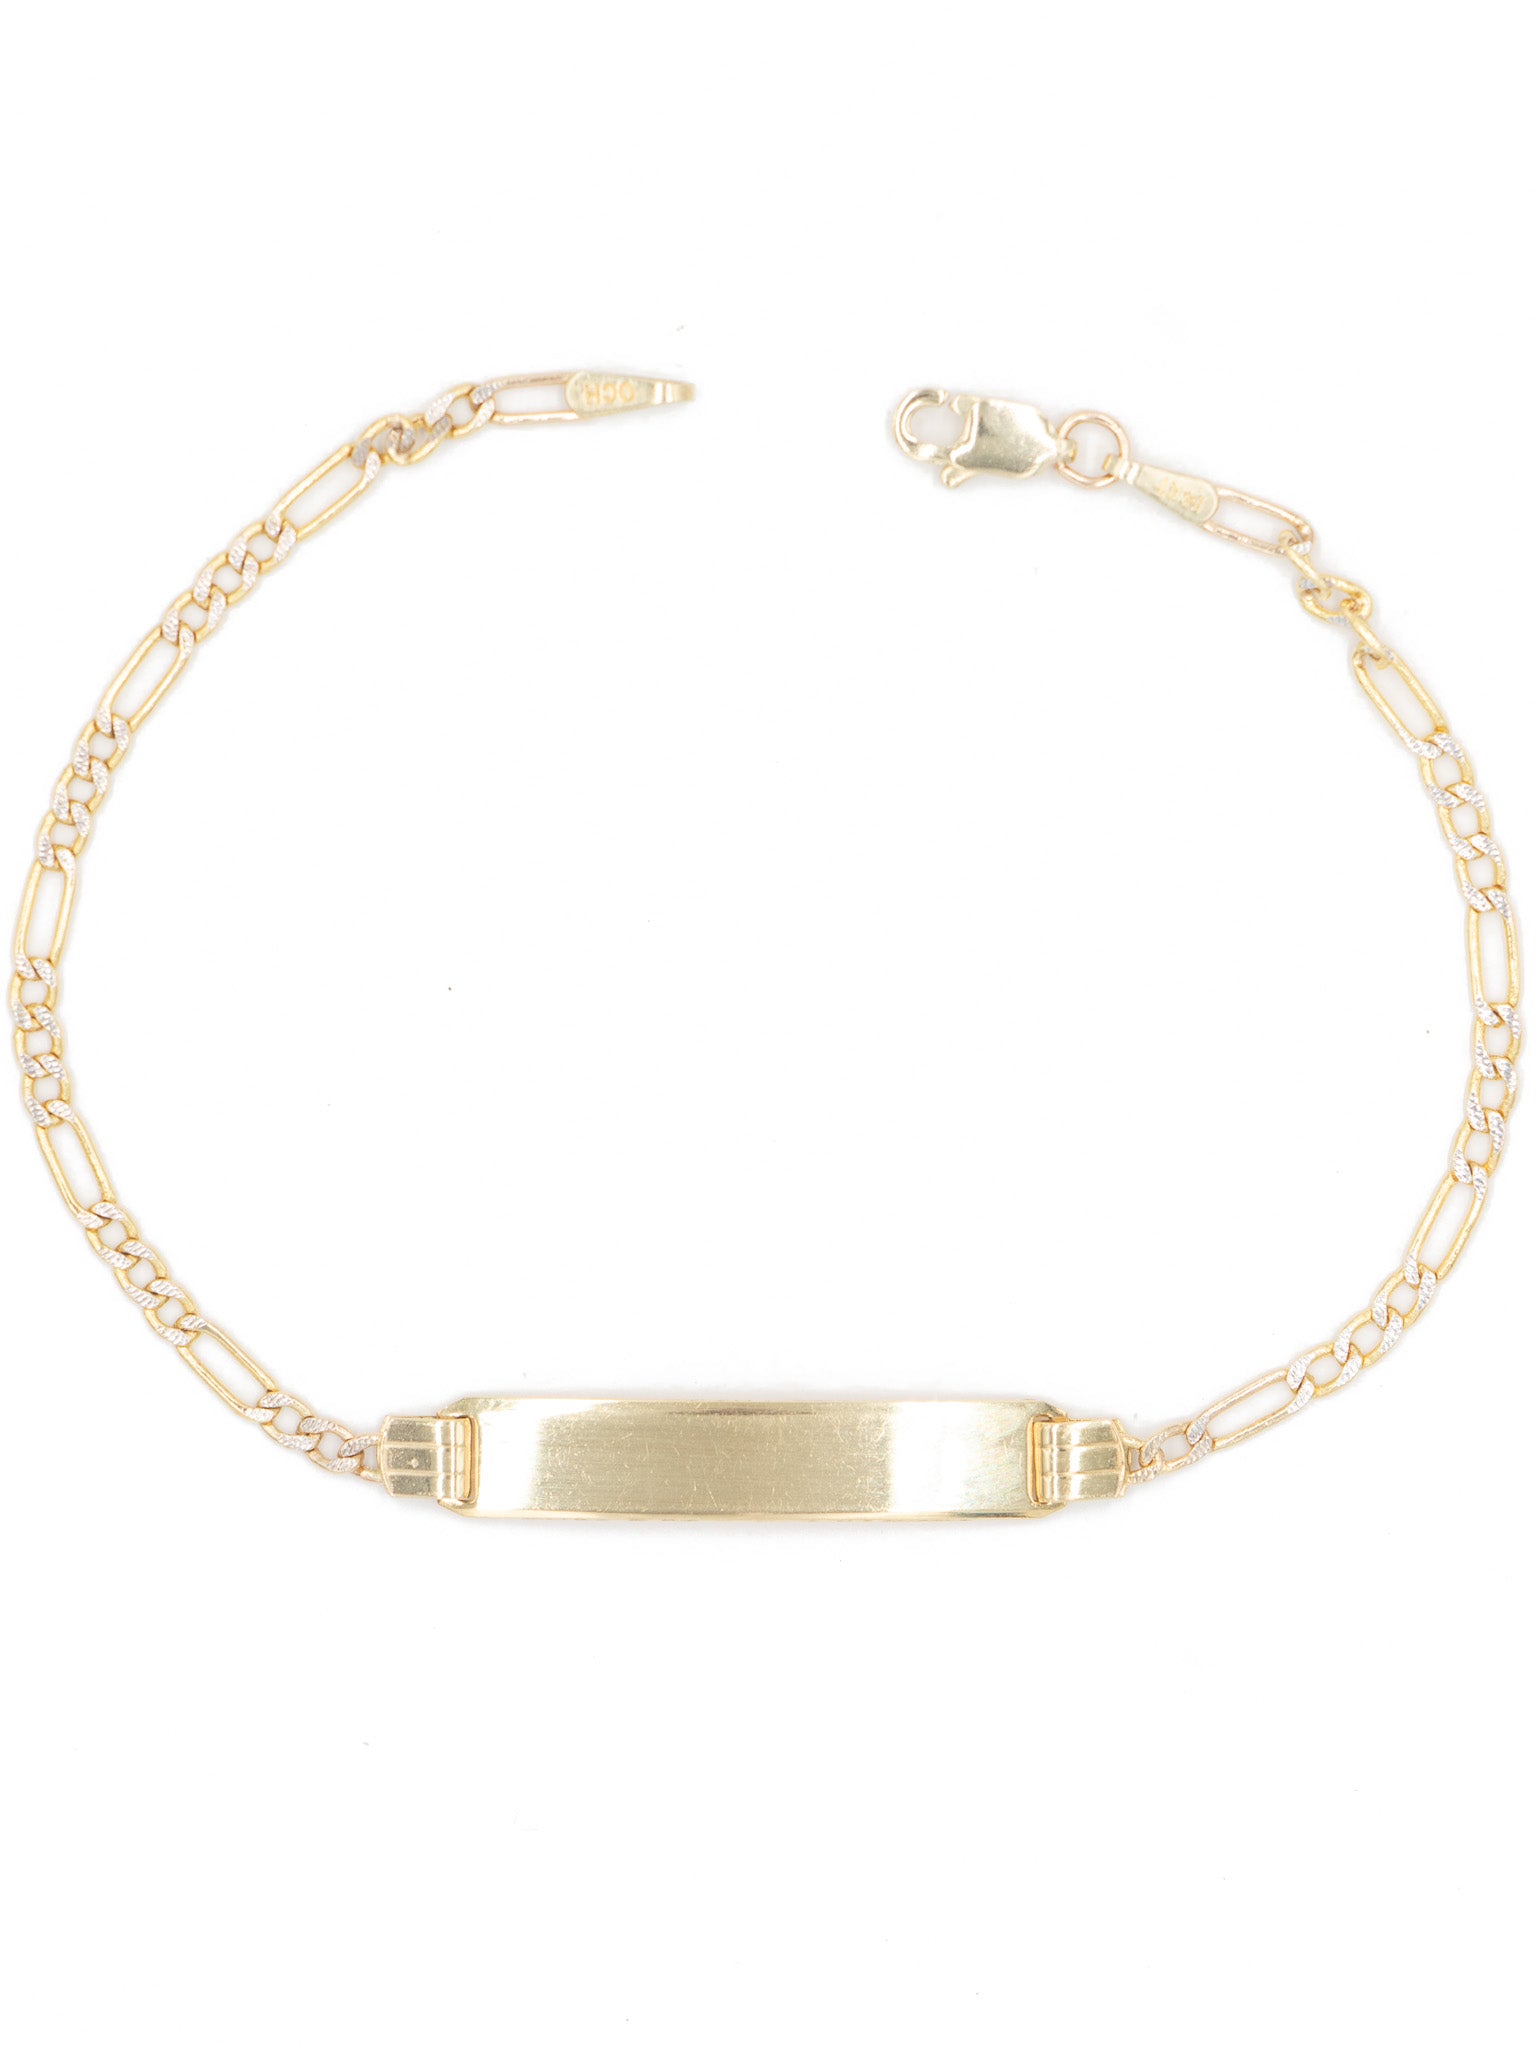 14K Gold Figaro ID Bracelet with White Gold Details